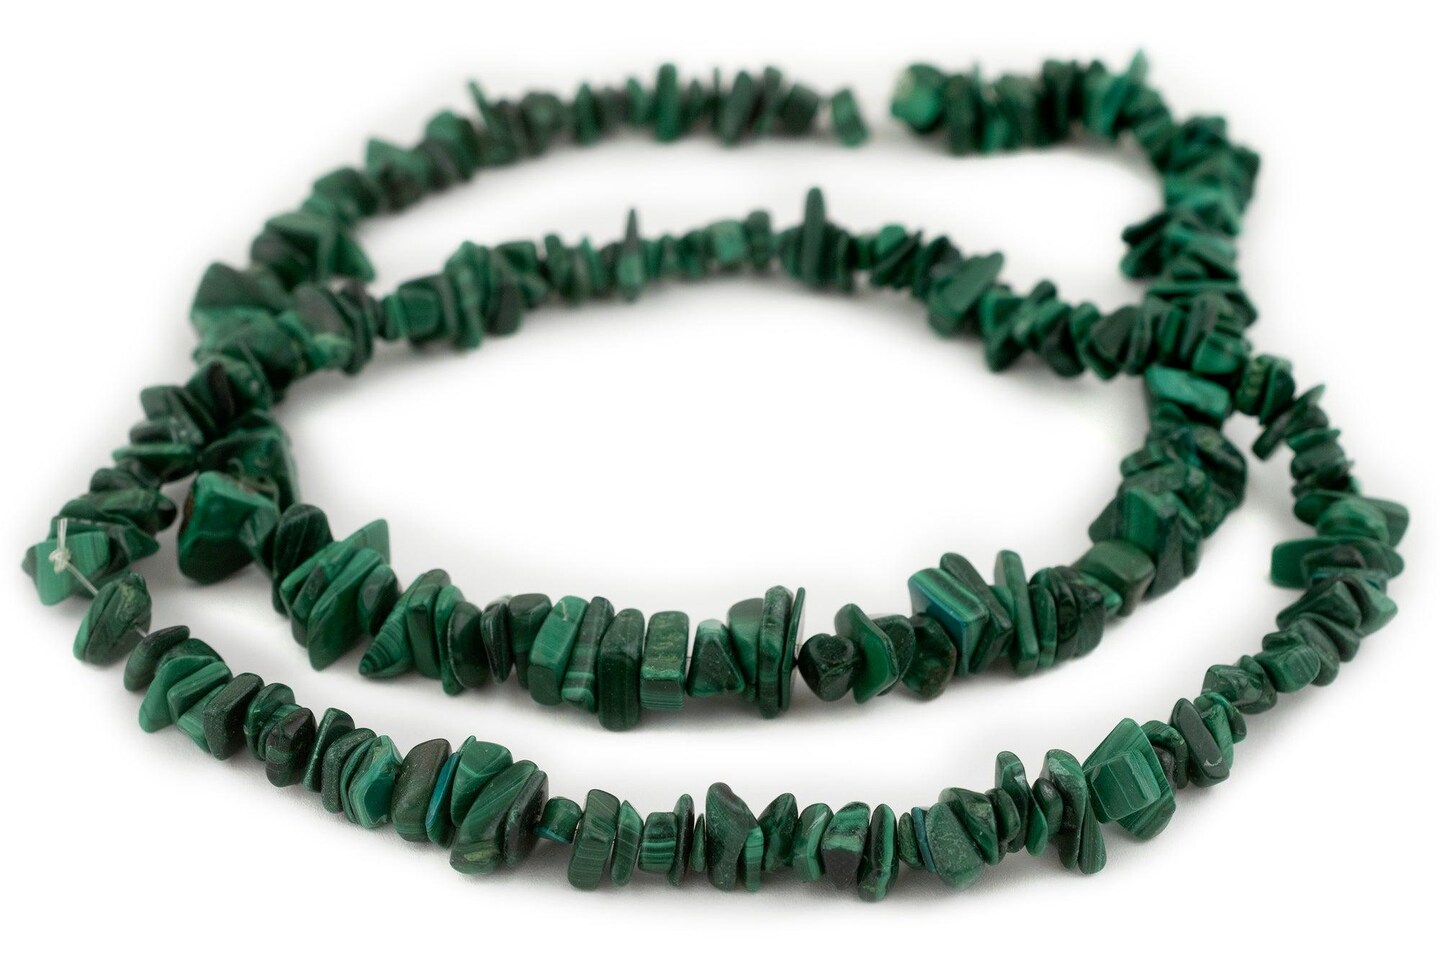 TheBeadChest Malachite Chip Beads 10mm Green Chips Gemstone 16 Inch Strand